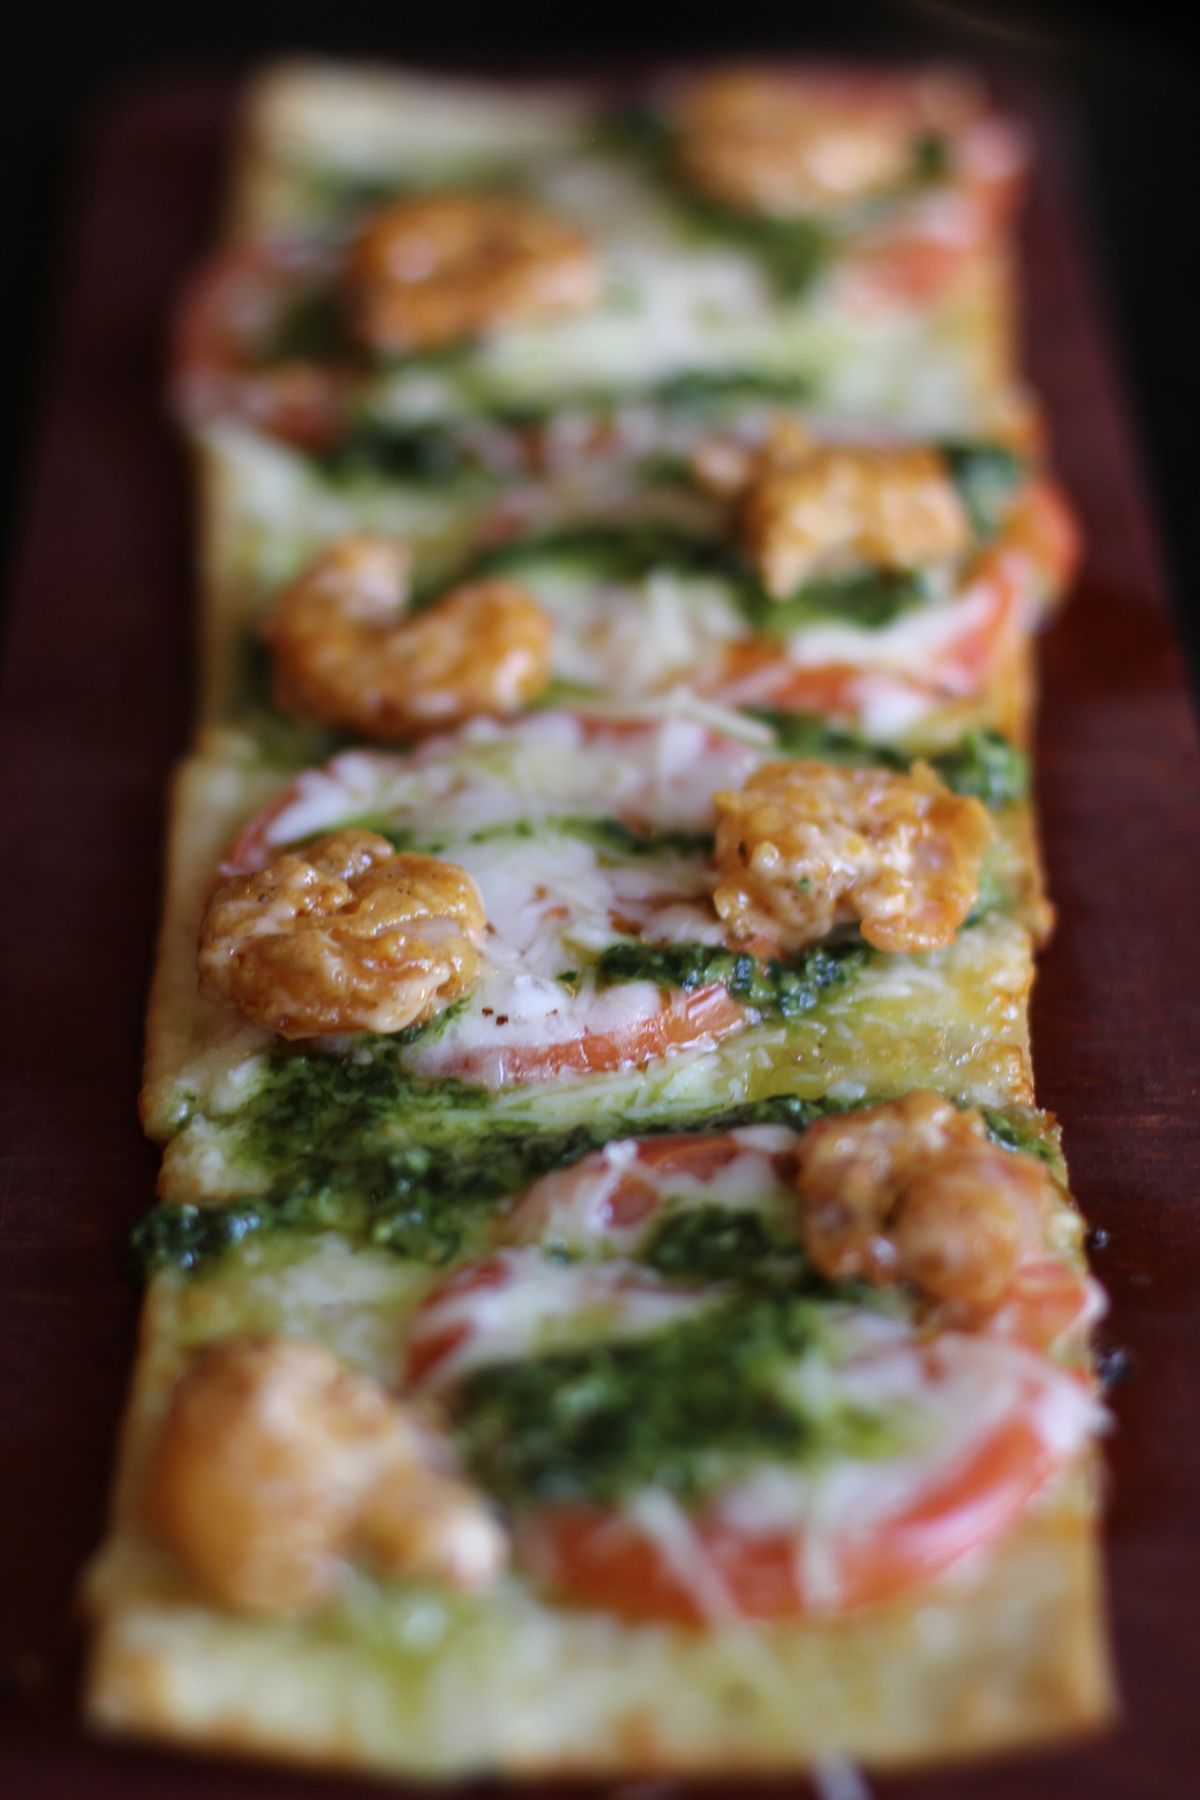 The spicy shrimp flatbread at the Safari Room in the Davenport Tower downtown has been renamed “The Farnham Flatbread,” after ESPN analyst Sean Farnham, as a fundraiser for Coaches vs. Cancer.  (Courtesy of Davenport Hotels)